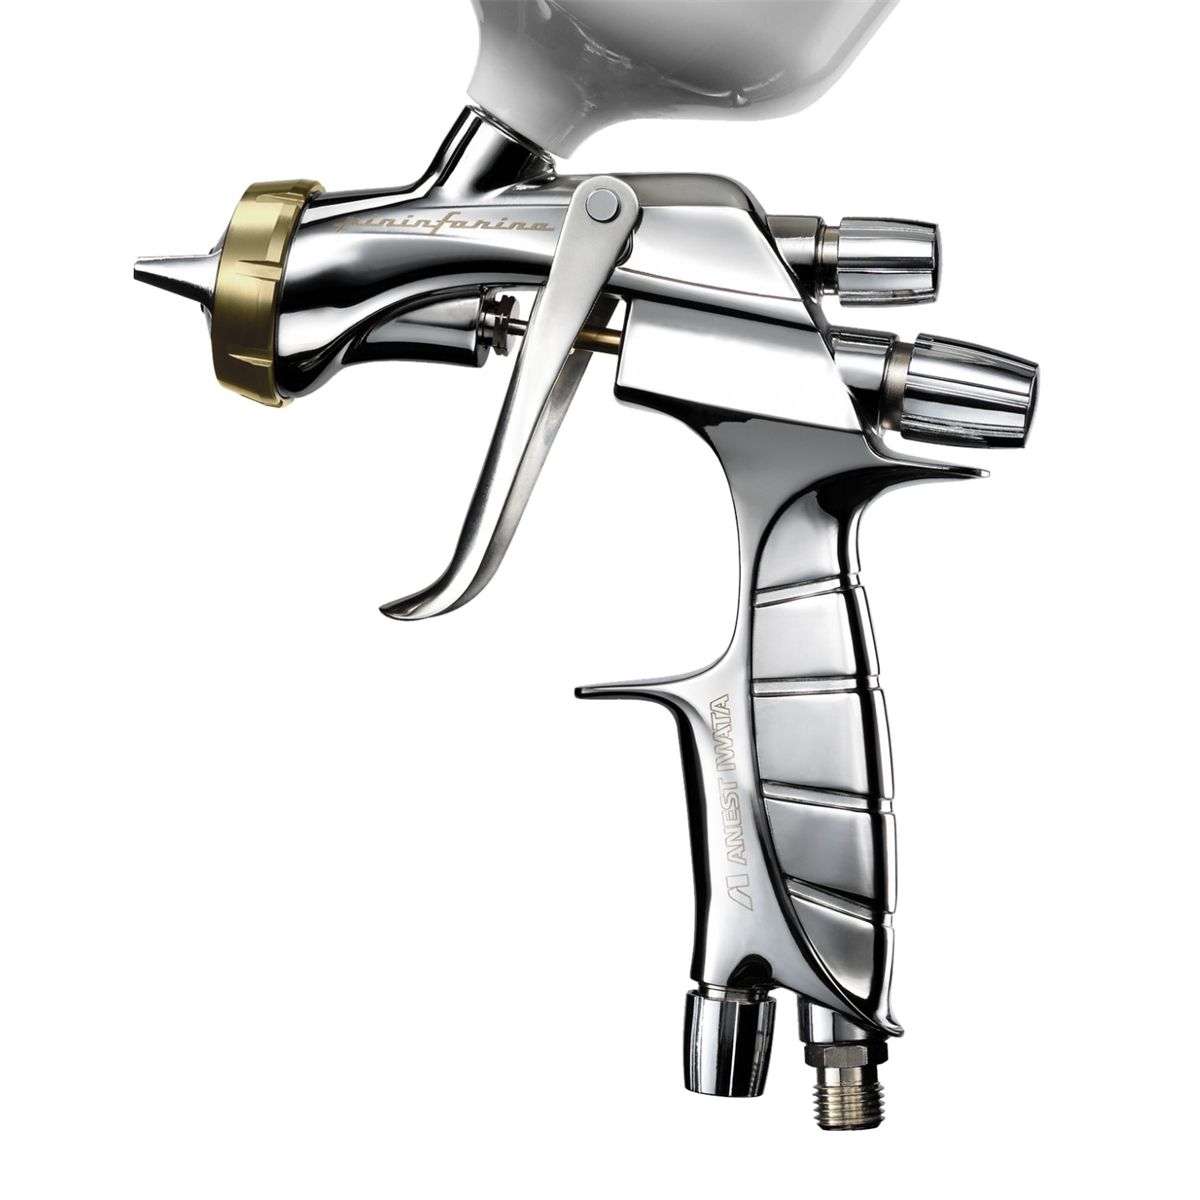 LS400H Supernova Hybrid Spray Gun with 1.4mm Nozzle and Gold Cap